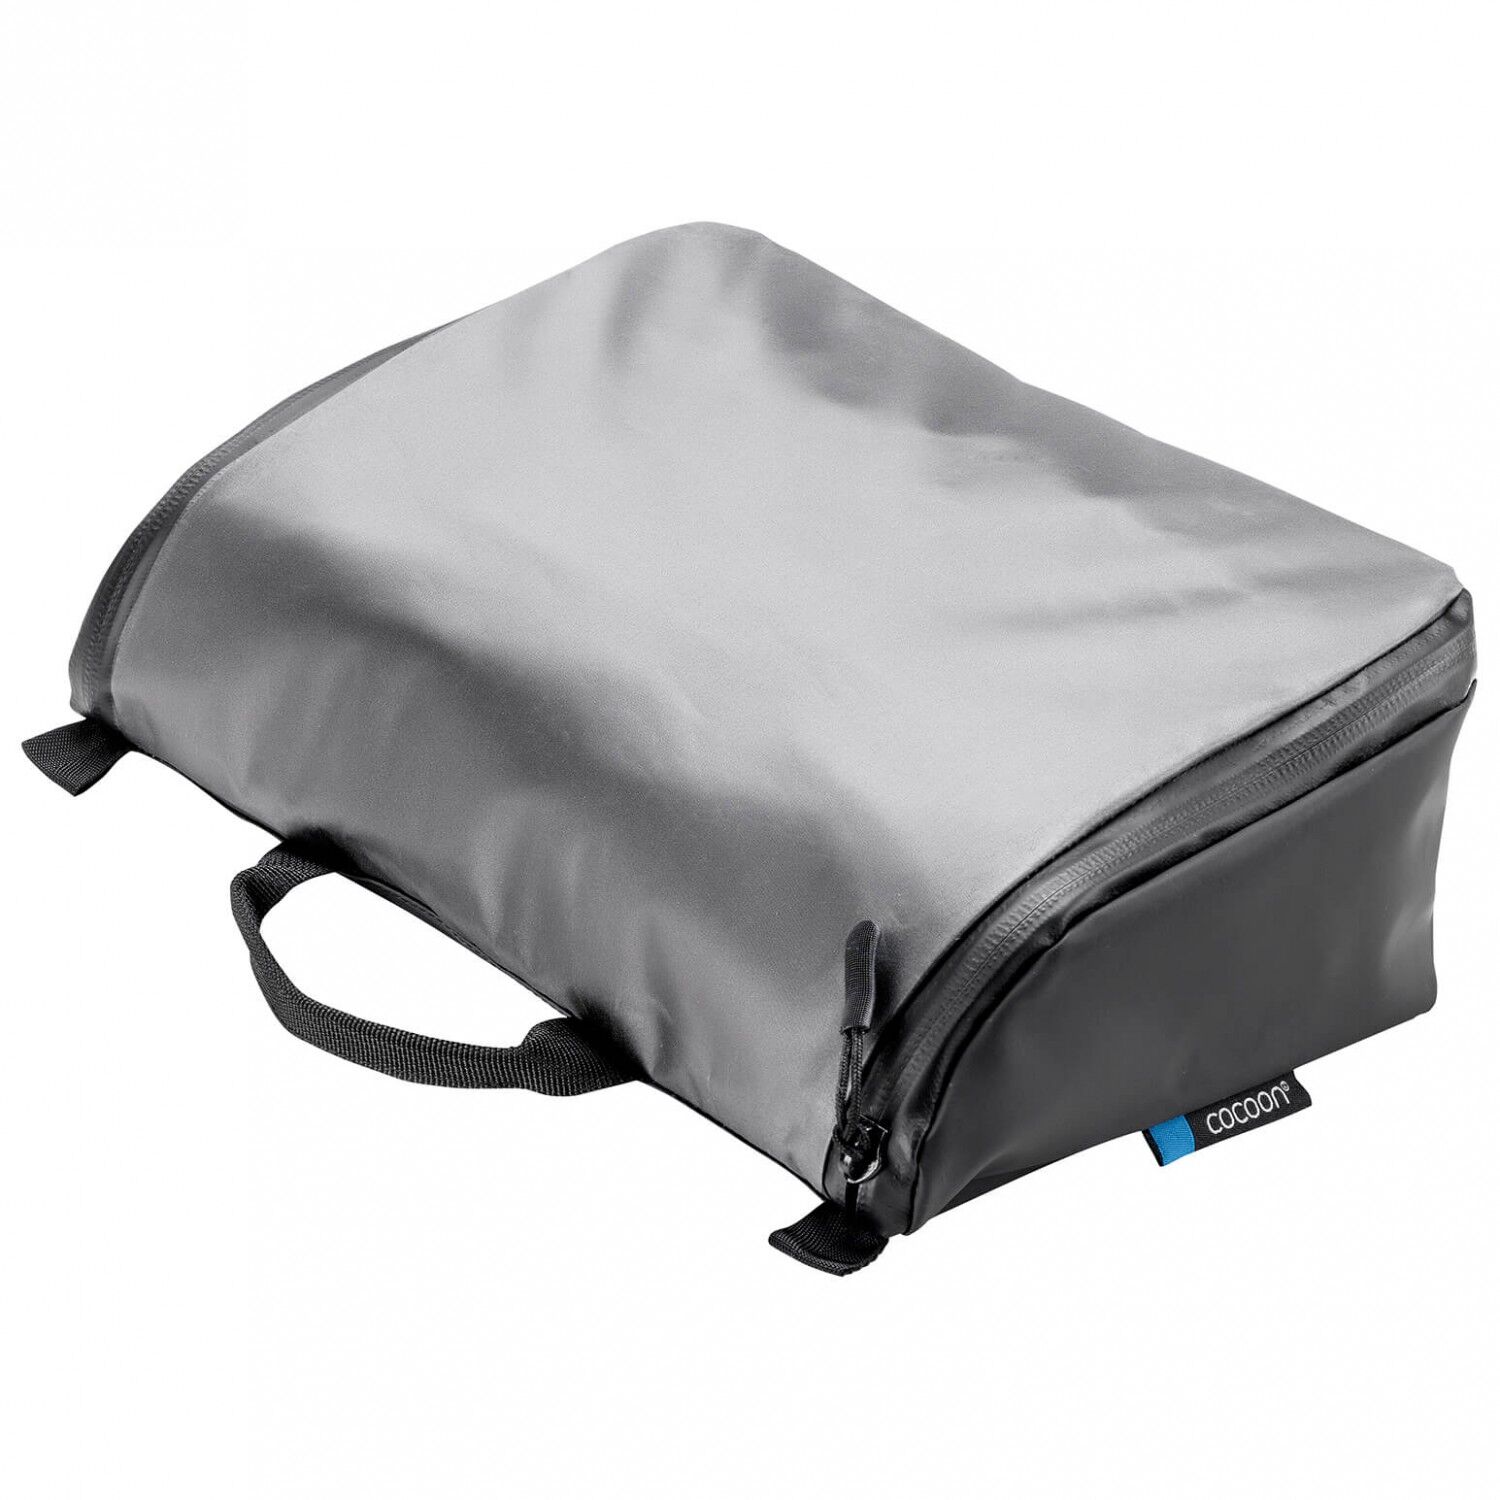 Cocoon Toiletry Kit Allrounder - Wash bag